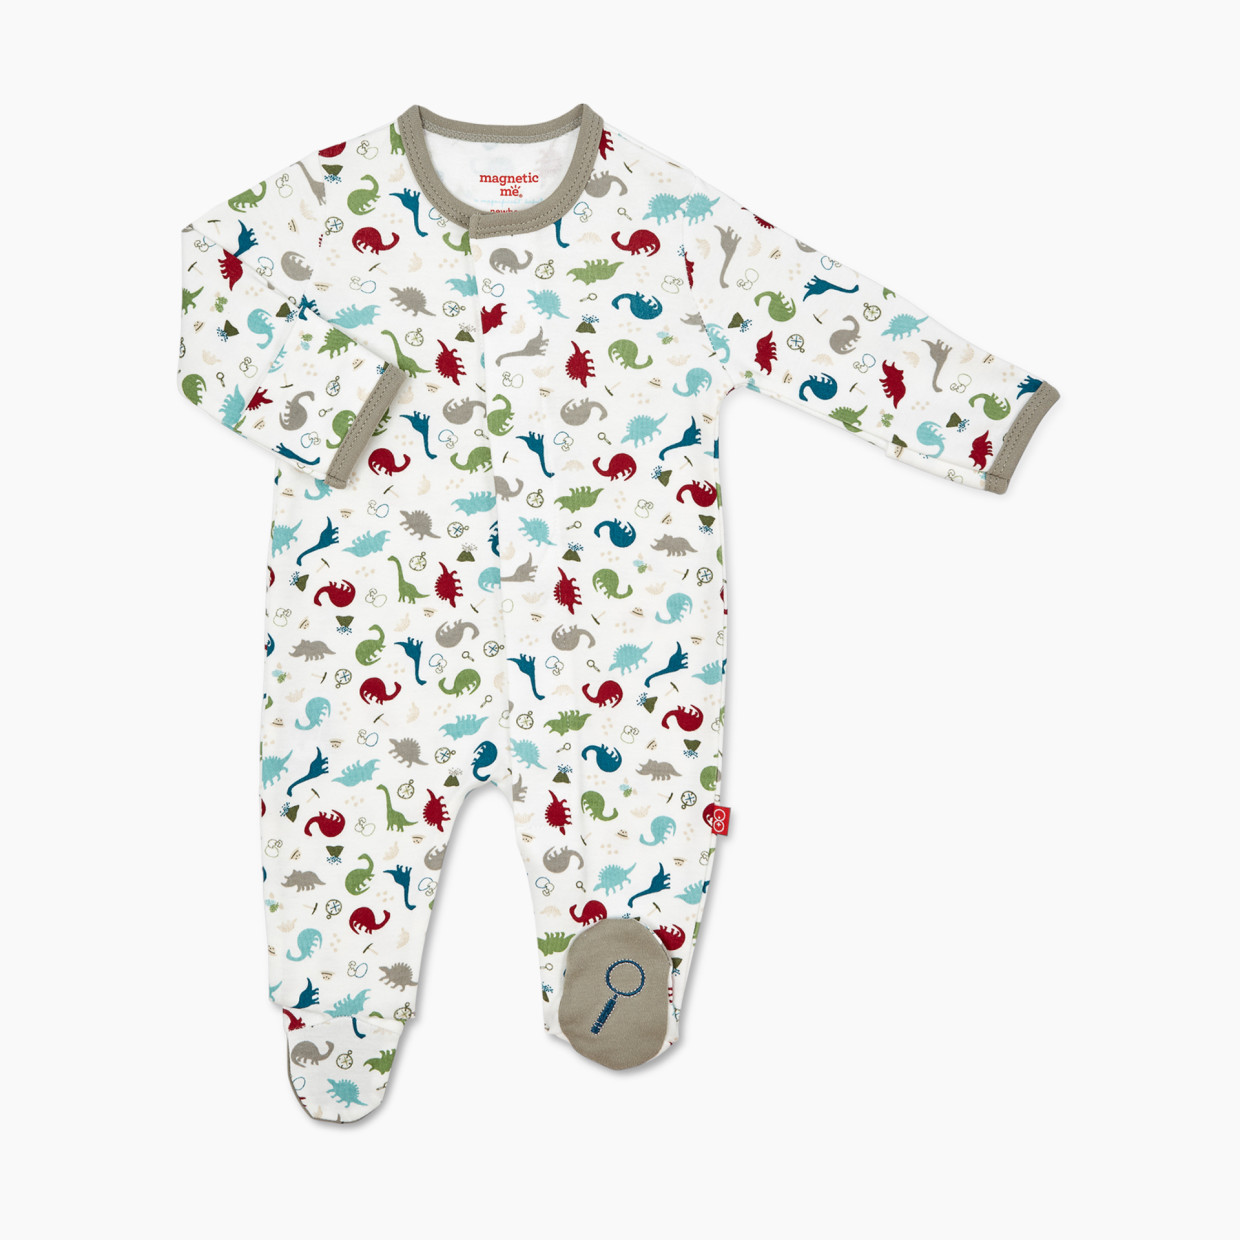 Magnetic Me Organic Cotton Footie - Dino Expedition, 0-3 Months.